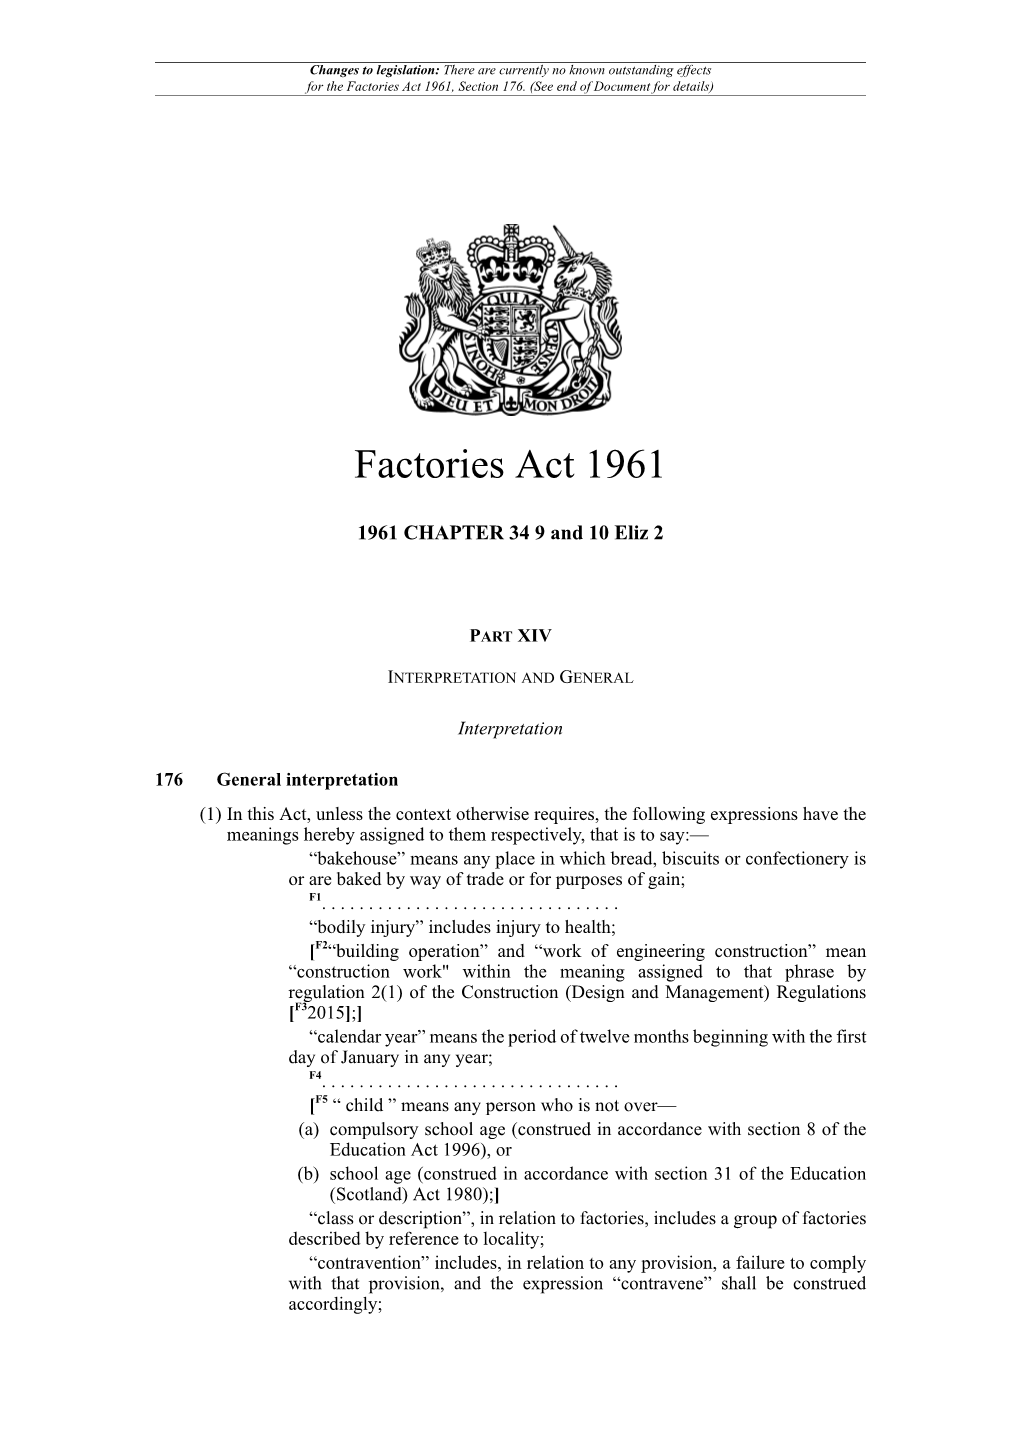 Factories Act 1961, Section 176